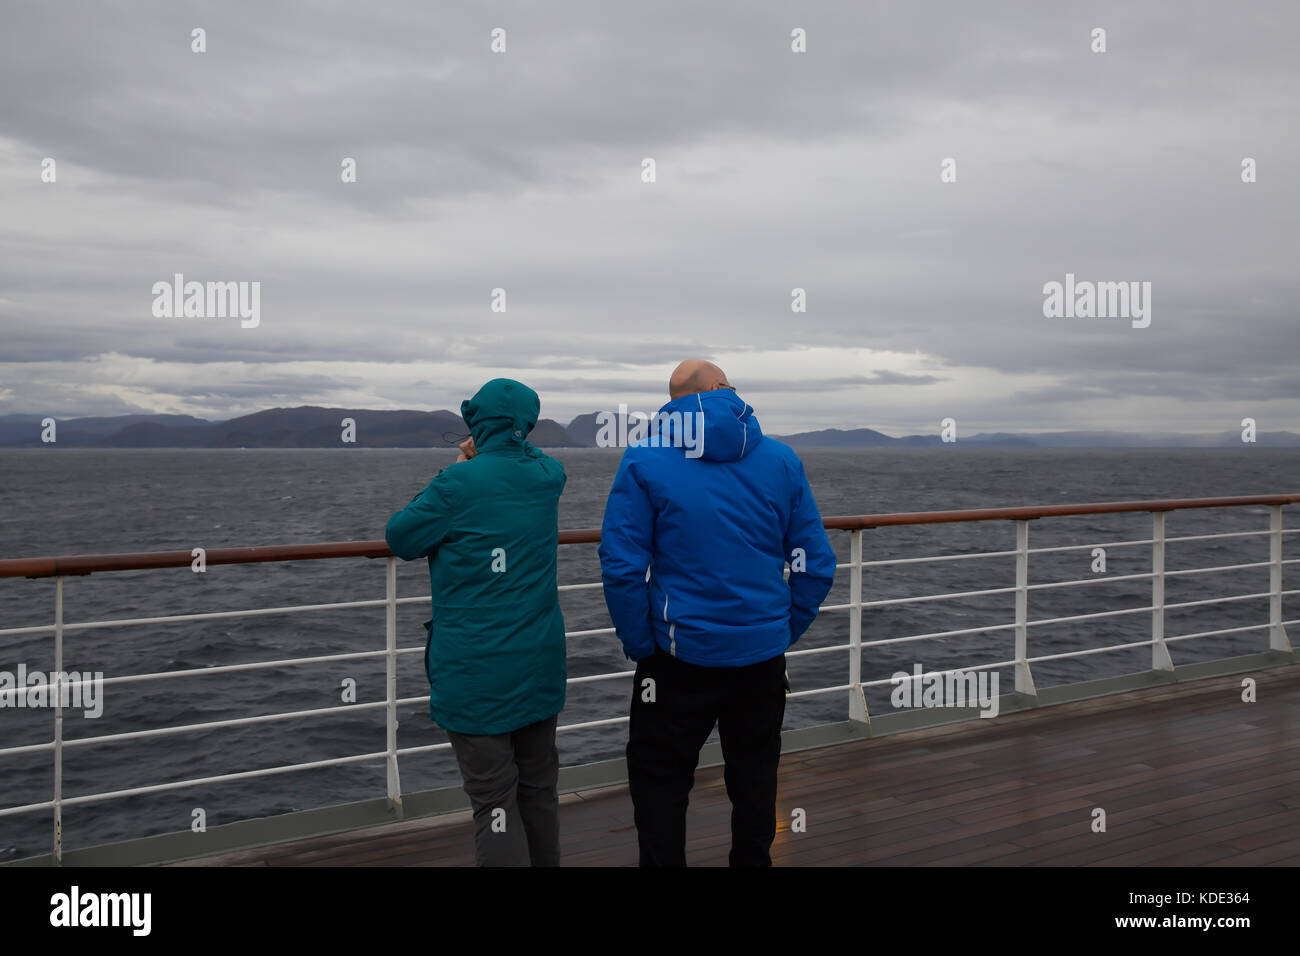 Alesund, Norway. 13th October, 2017. Cloudy and Grey skies over Magellan as it approaches Alesund in Norway. People on board wrap up warm against the inclement weather as they view the scenery passing by. © Keith Larby/Alamy Live News Stock Photo